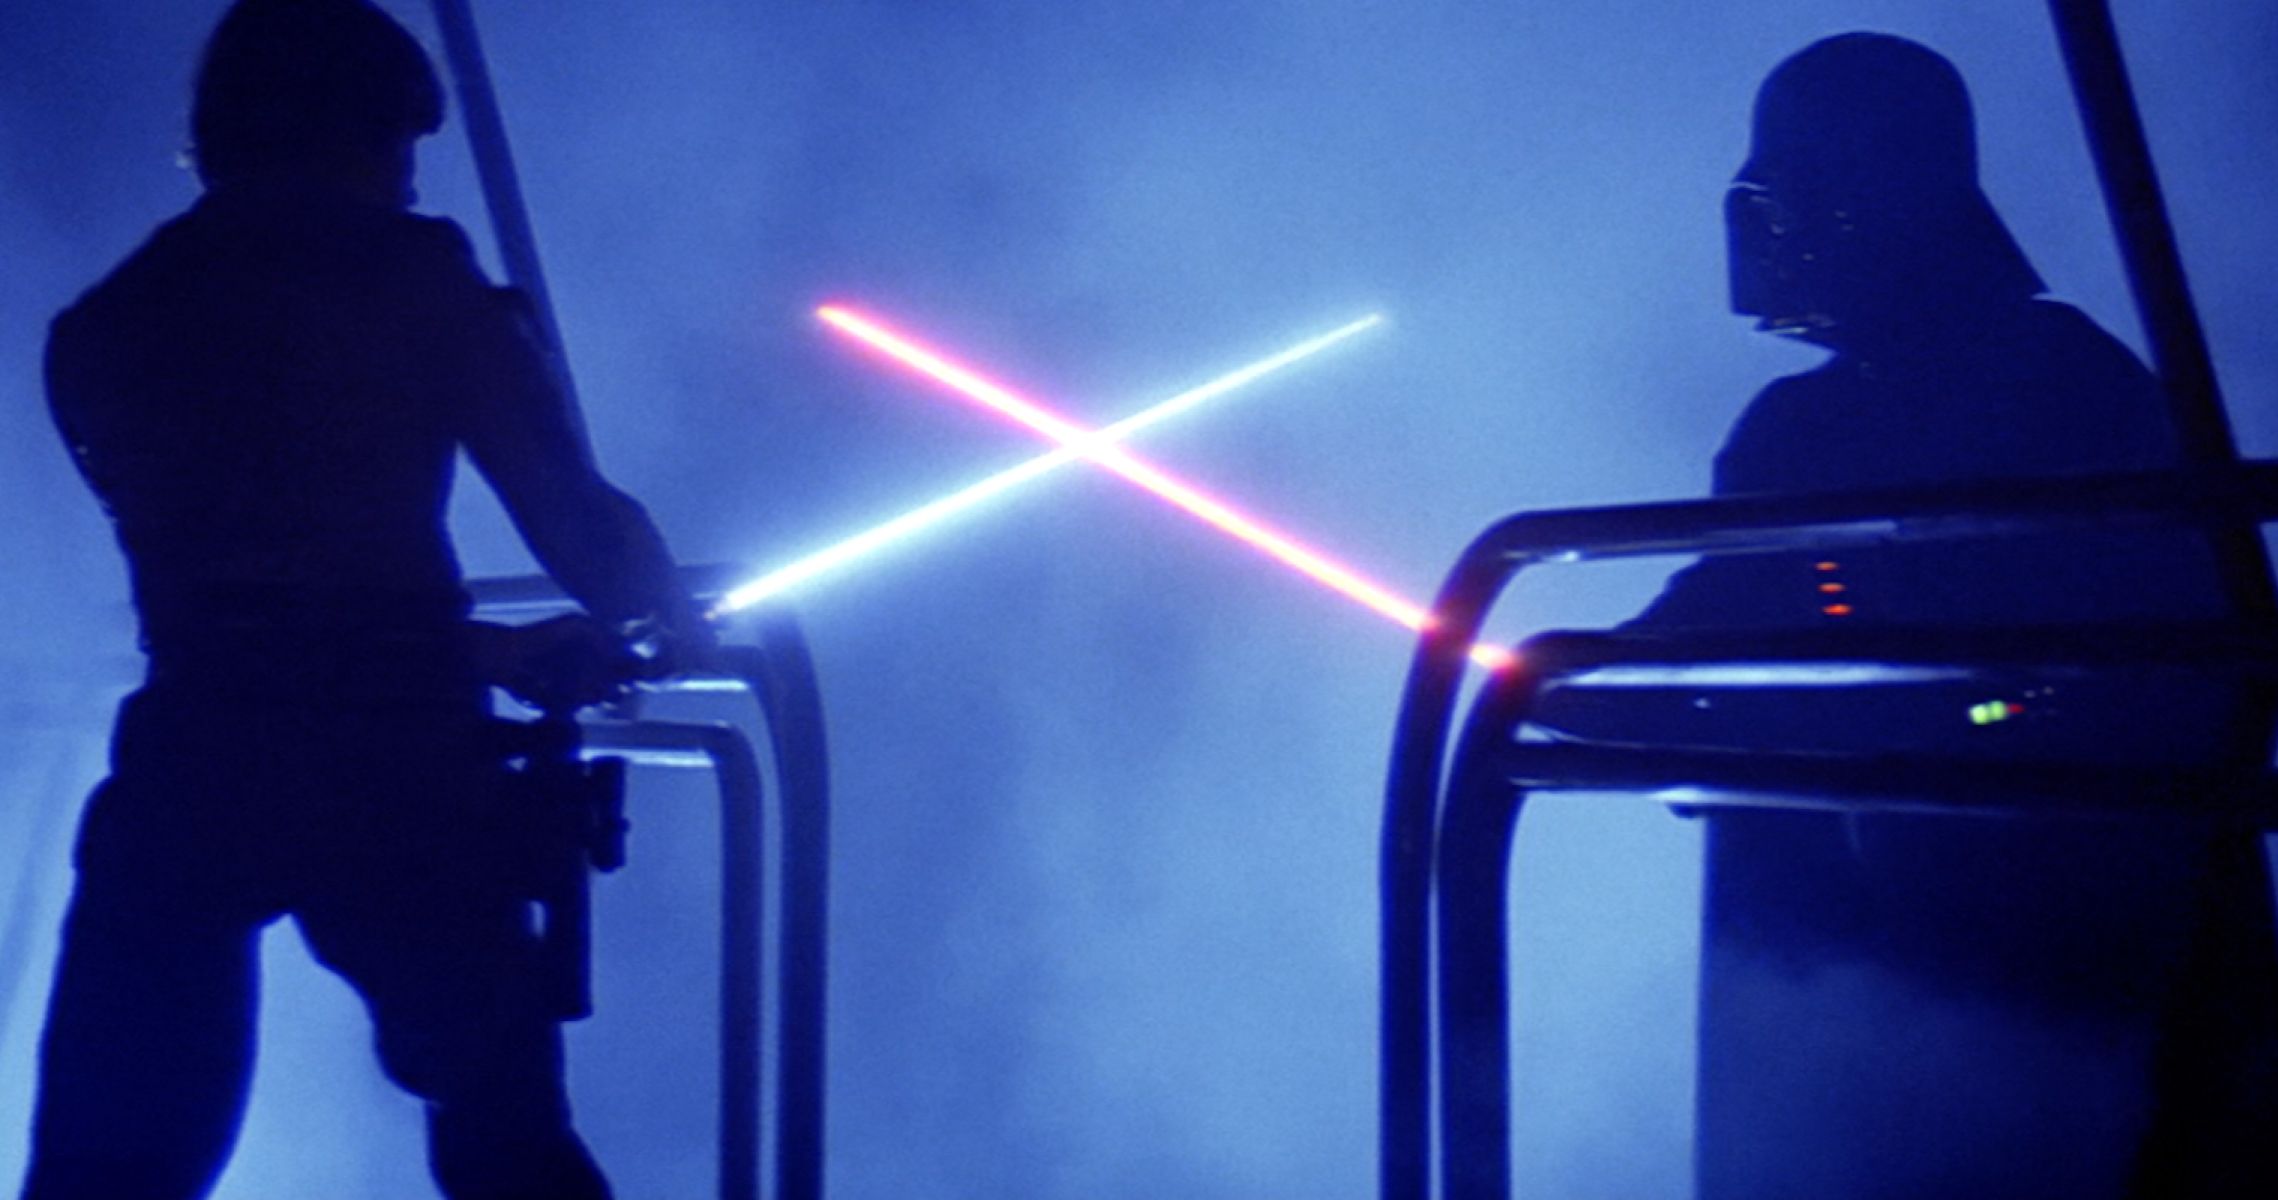 Empire Strikes Back Lightsaber Goof Discovered Nearly 40 Years After Release